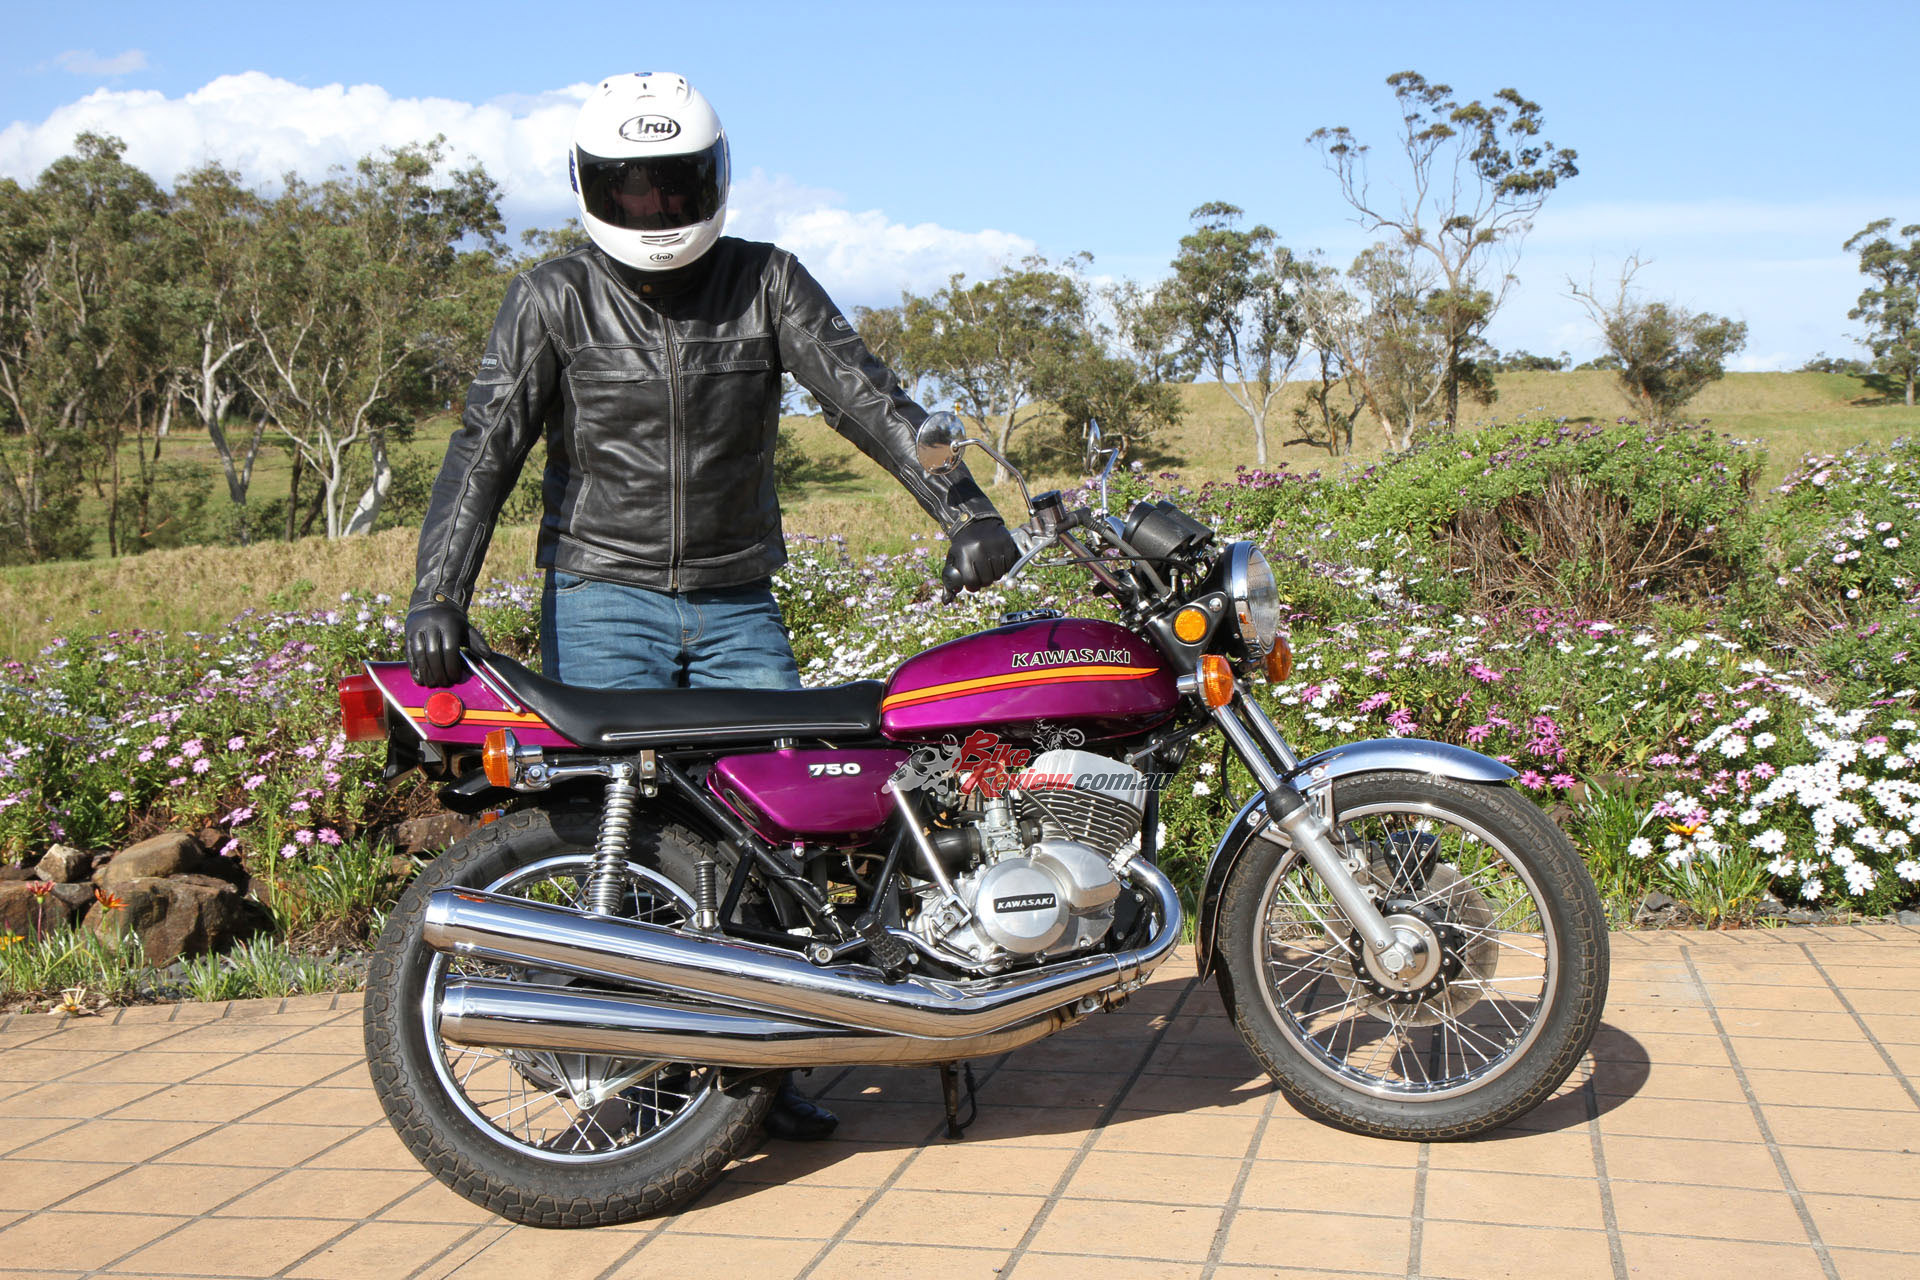 investering krater anklageren Throwback Thursday: Deep Purple - Riding a 1973 Kawasaki H2 750 - Bike  Review